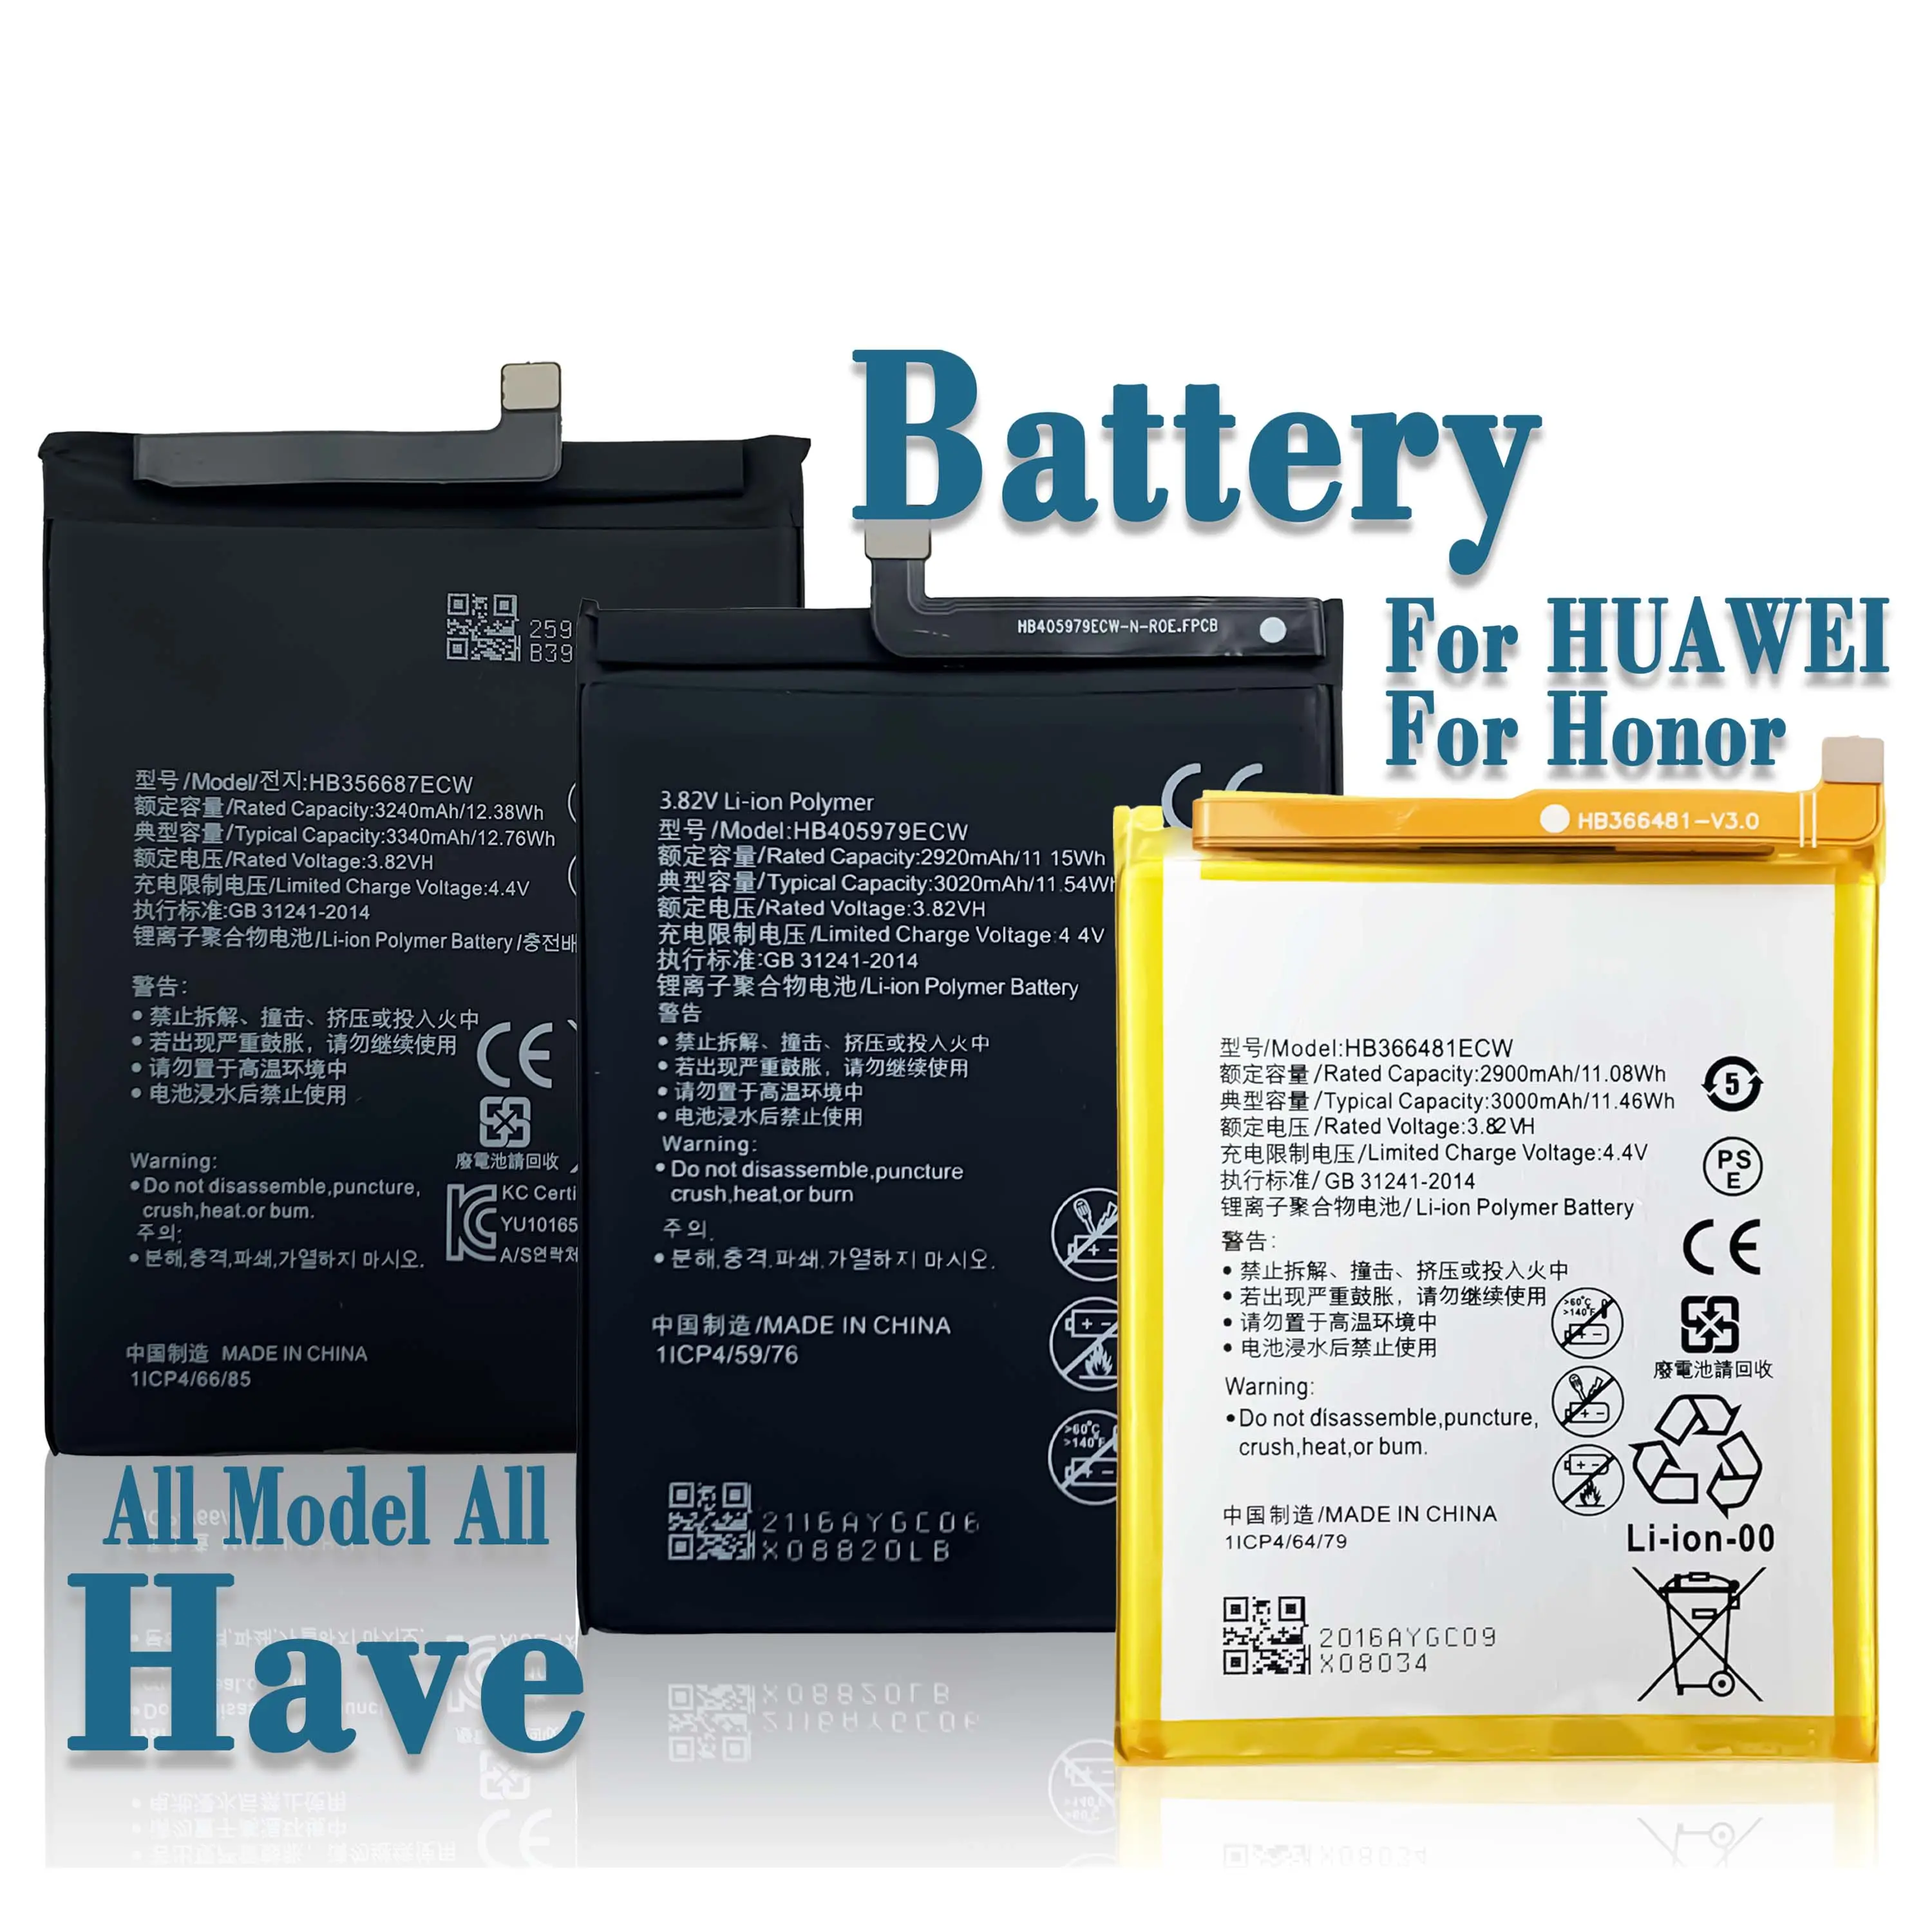 OEM Factory direct battery for Huawei P8 P10 lite P20 Pro Nova 3i batterie replacement for Huawei all models phone battery